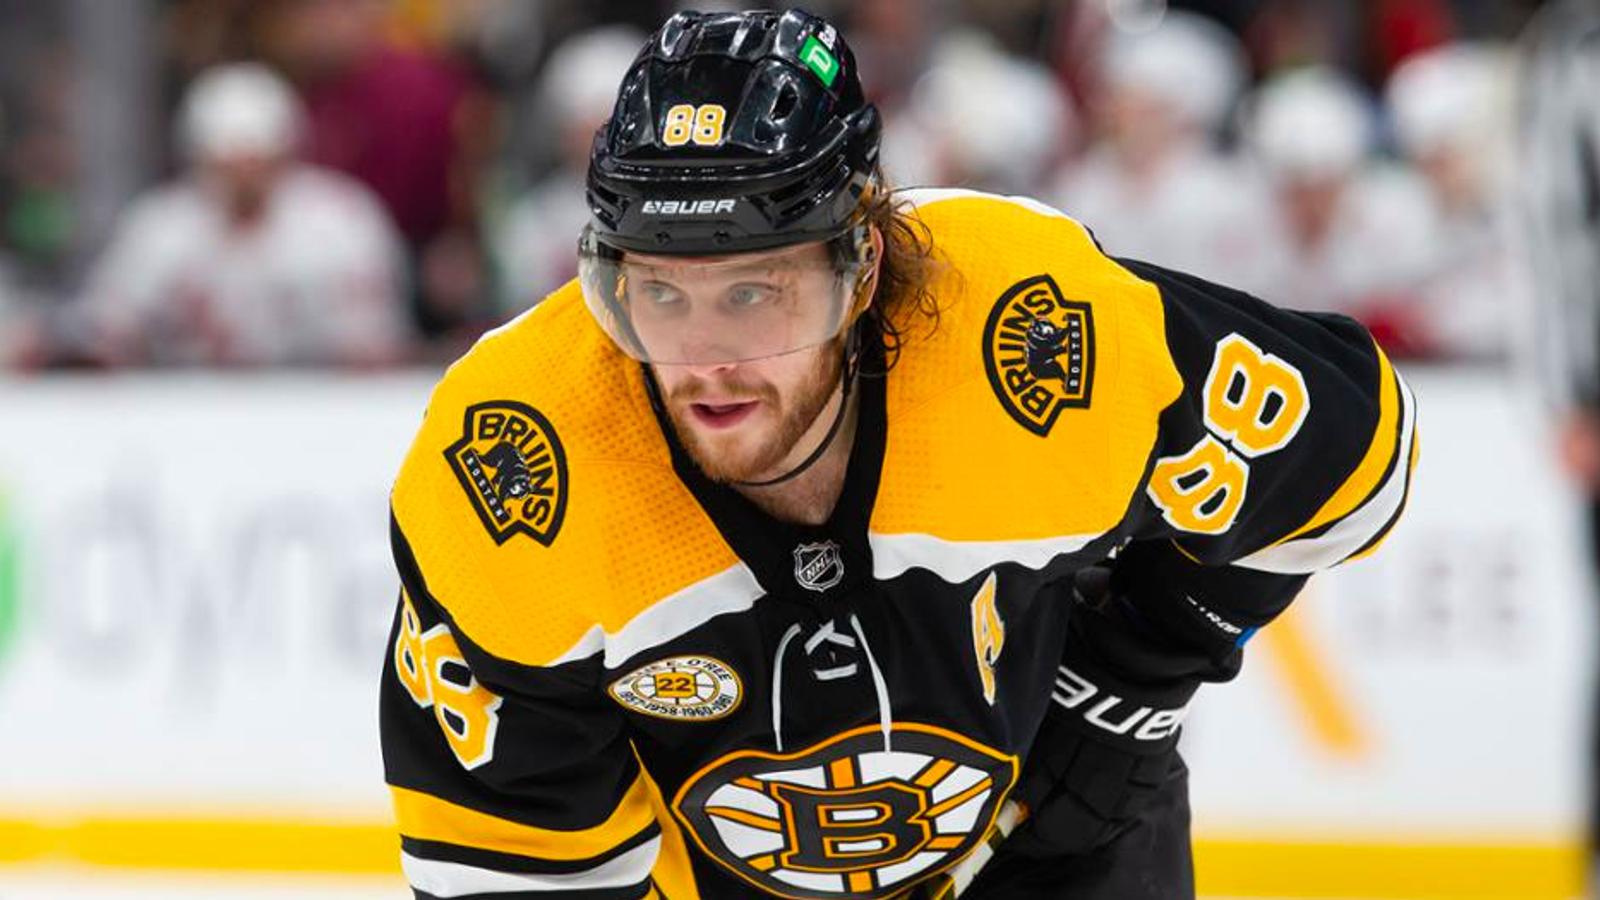 Report: Pastrnak to sign richest contract in team history